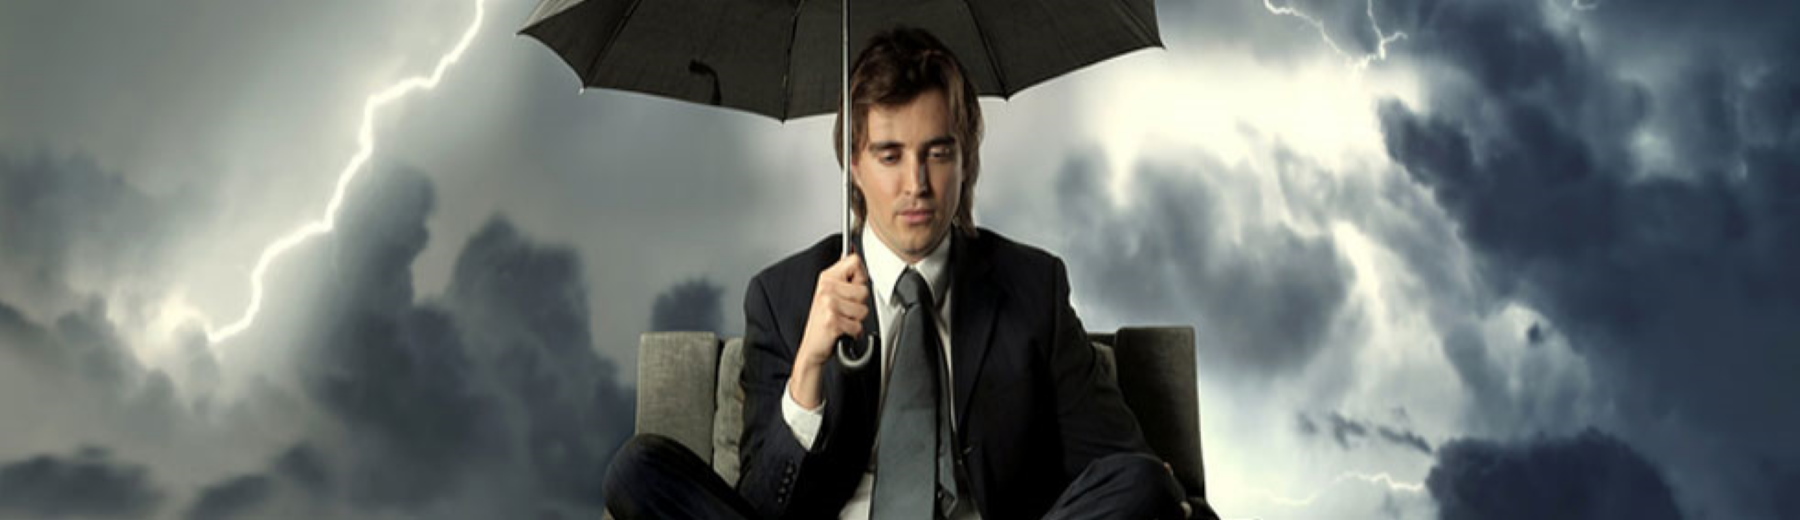 sad man sitting in chair with umbrella covering him